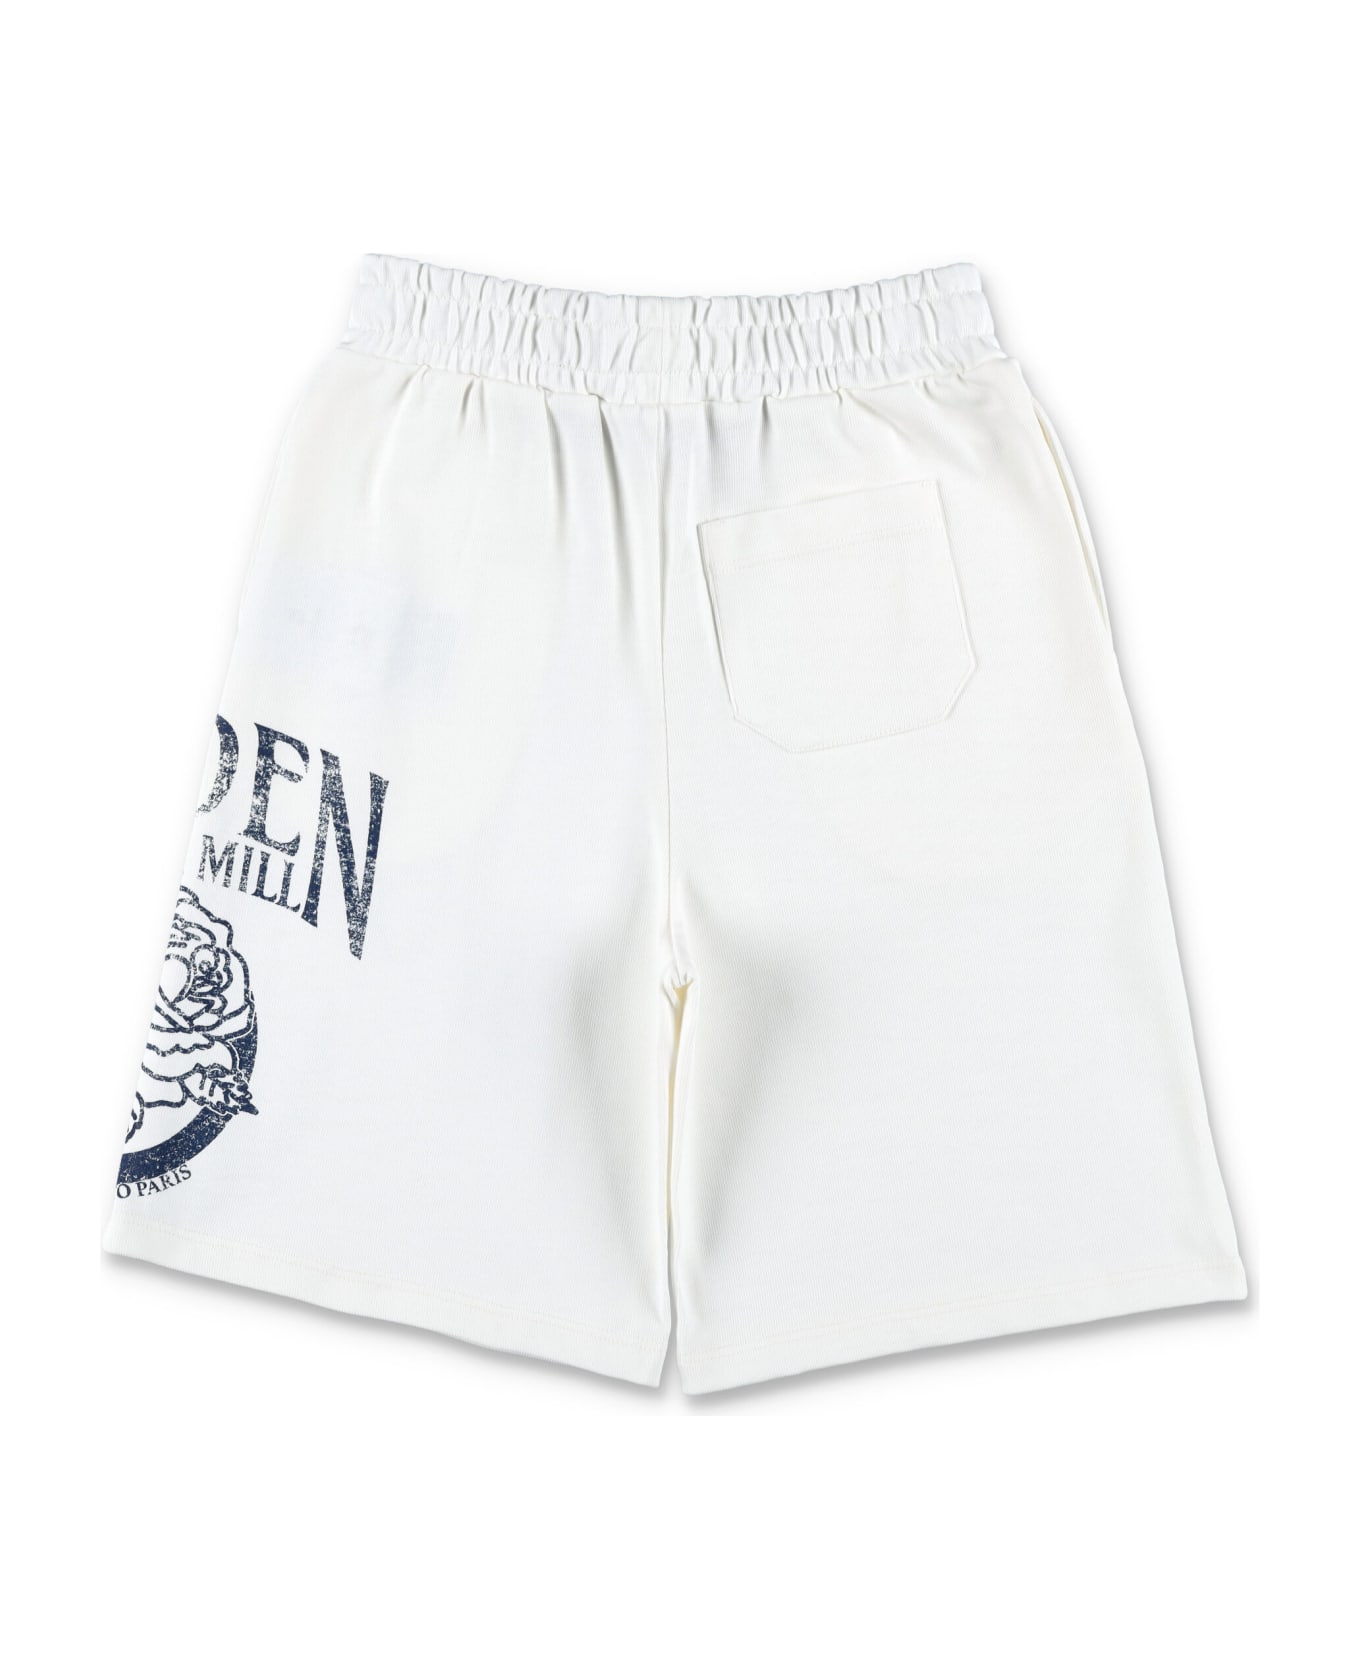 Golden Goose Printed Sweat-shorts - ARTIC WOLF/ECLIPSE